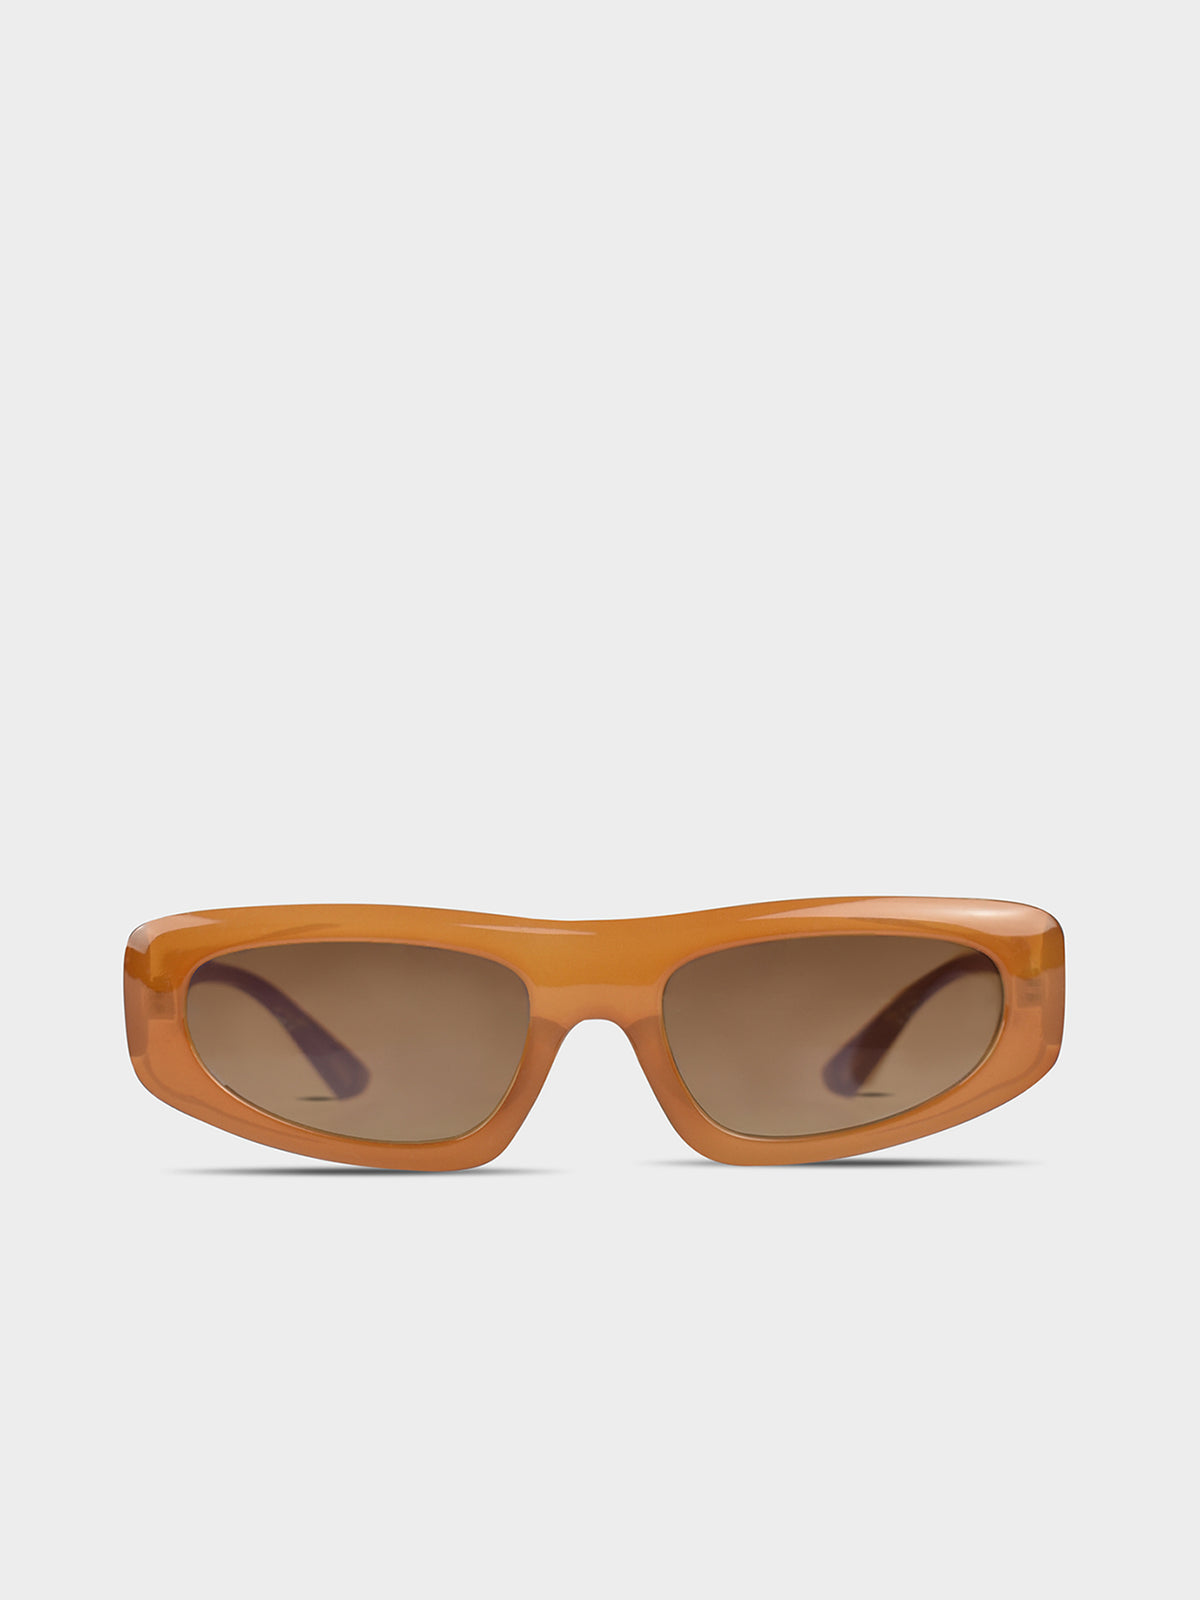 Dexter Sunglasses in Toffee